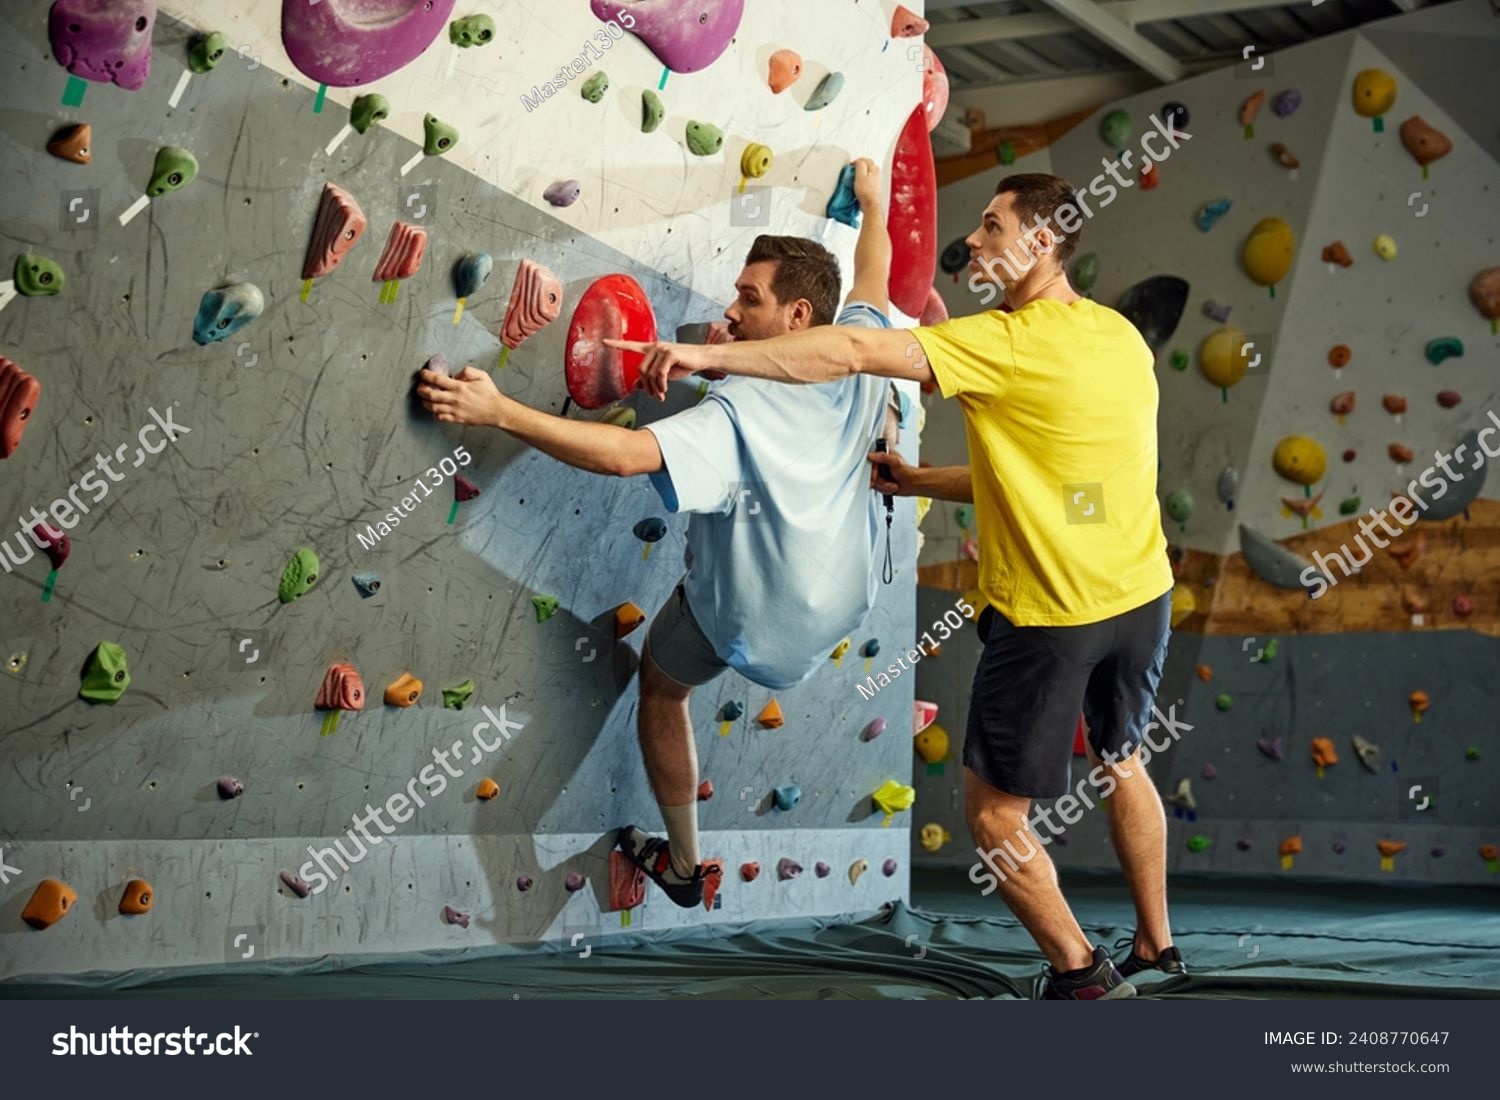 Male instructor teaching man to climb artificial wall. Man training, climbing up the artificial stones. Bouldering activity. Concept of sport, sport climbing, hobby, active lifestyle, school, course #2408770647